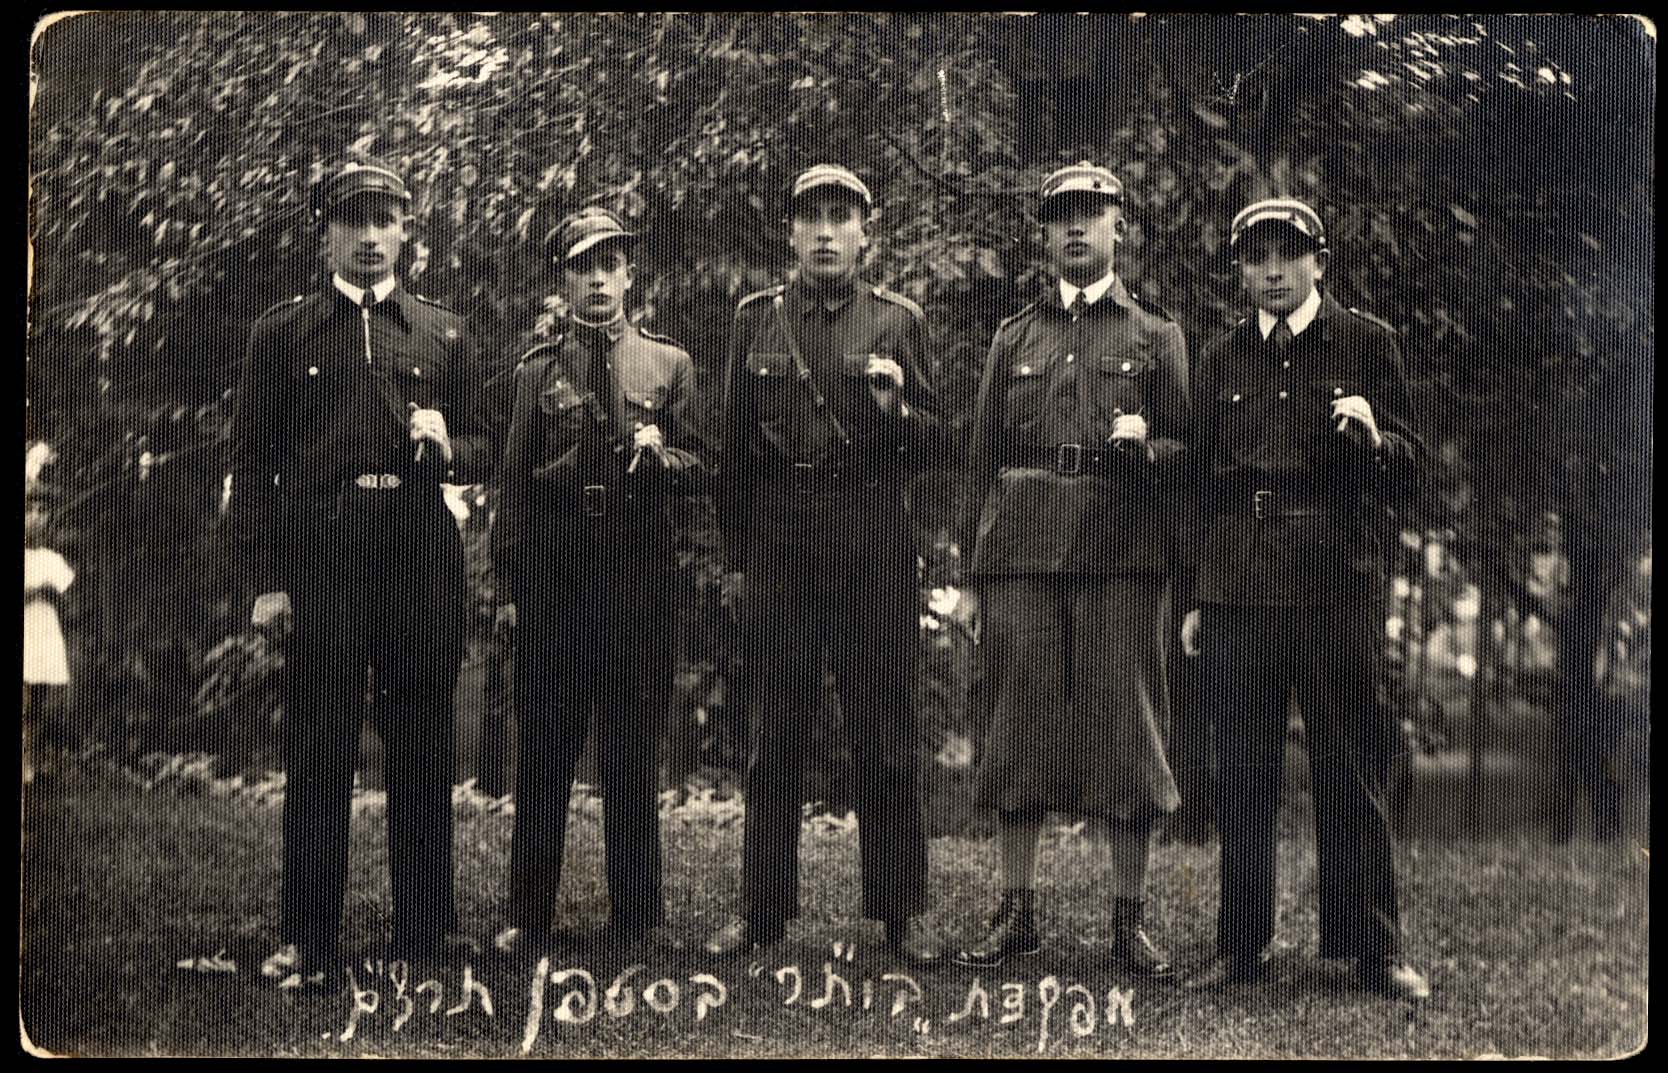 Leaders of the Beitar youth movement, 1930-1931